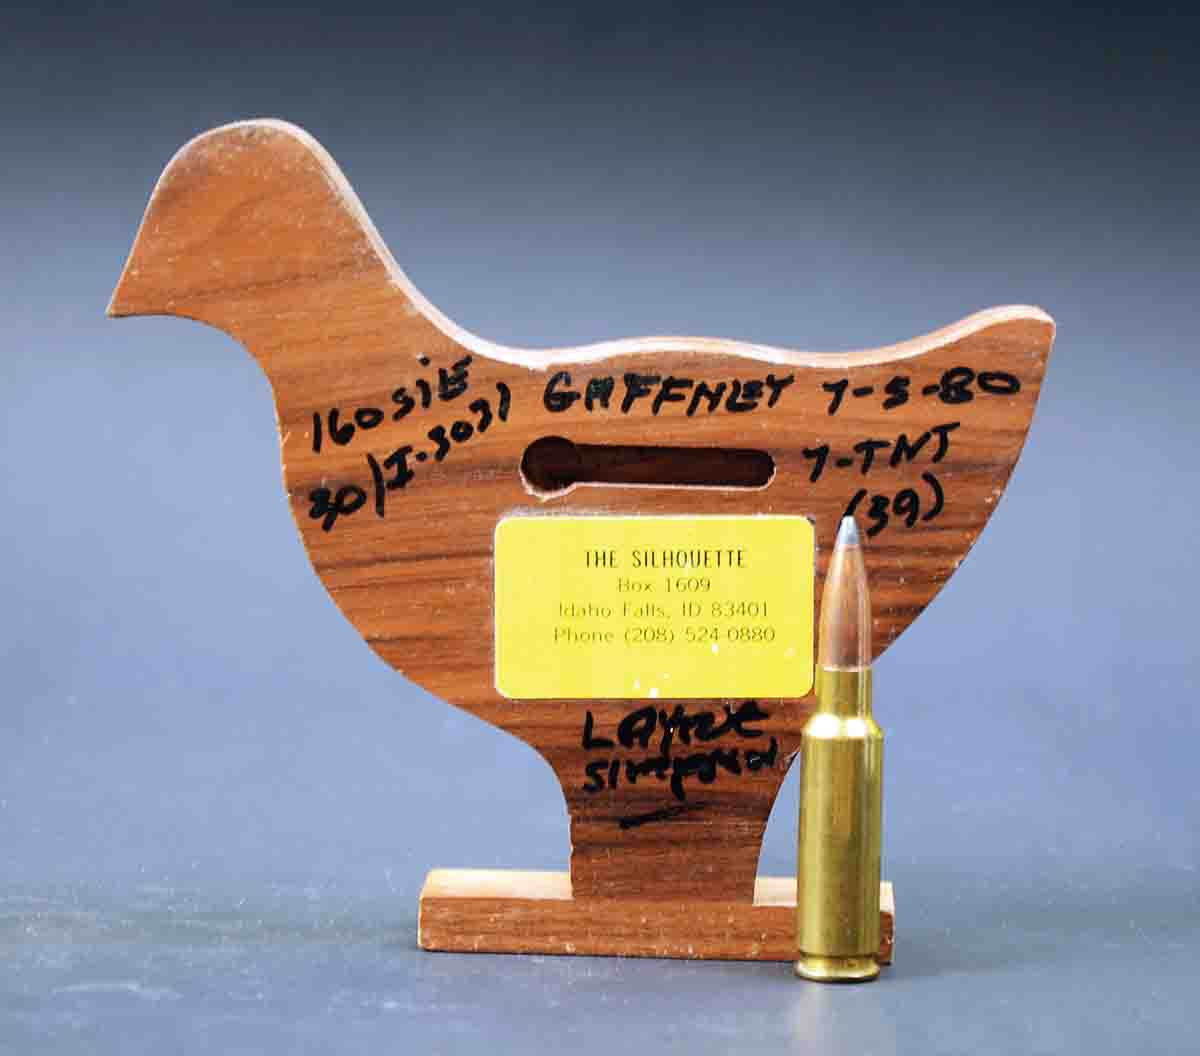 This unlimited-class trophy was awarded to Layne after he shot a 39x40 in his very first match in 1980. On it he wrote other information, including the powder and bullet used in the 7mm TNT.